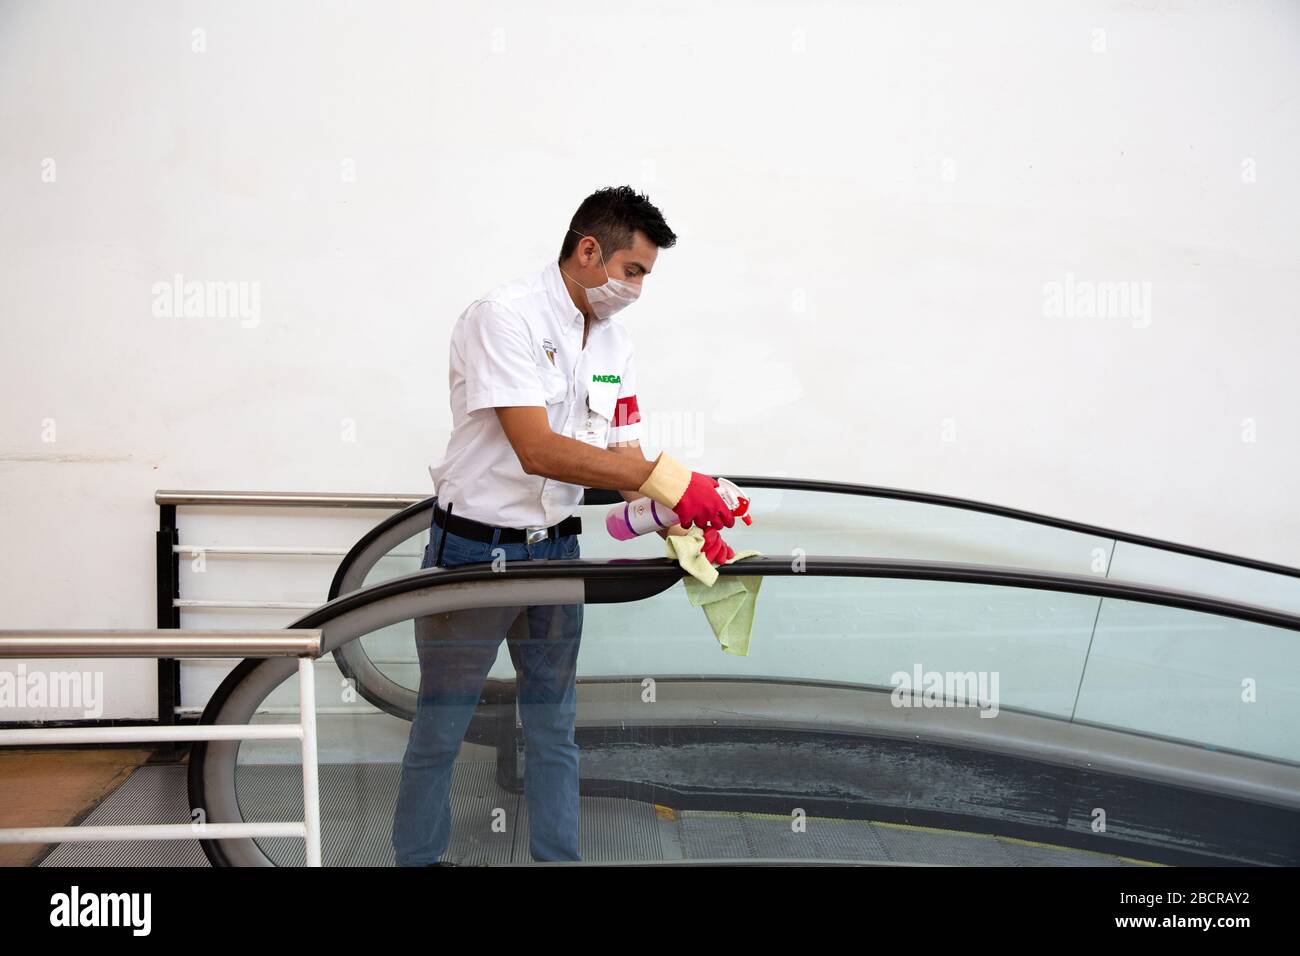 An employee cleans and sanitizes the core of an escalator at the entrance of a supermarket in Merida, Yucatan, Mexico on April 4, 2020. Coronavirus disease (COVID-19) is an infectious disease caused by a newly discovered coronavirus. Most people infected with this virus will experience mild to moderate respiratory illness and recover without requiring special treatment. Older adults and those with underlying medical conditions such as cardiovascular diseases, diabetes, chronic respiratory diseases, compromised immune systems and cancer face increased risk of serious illness or death. The World Stock Photo